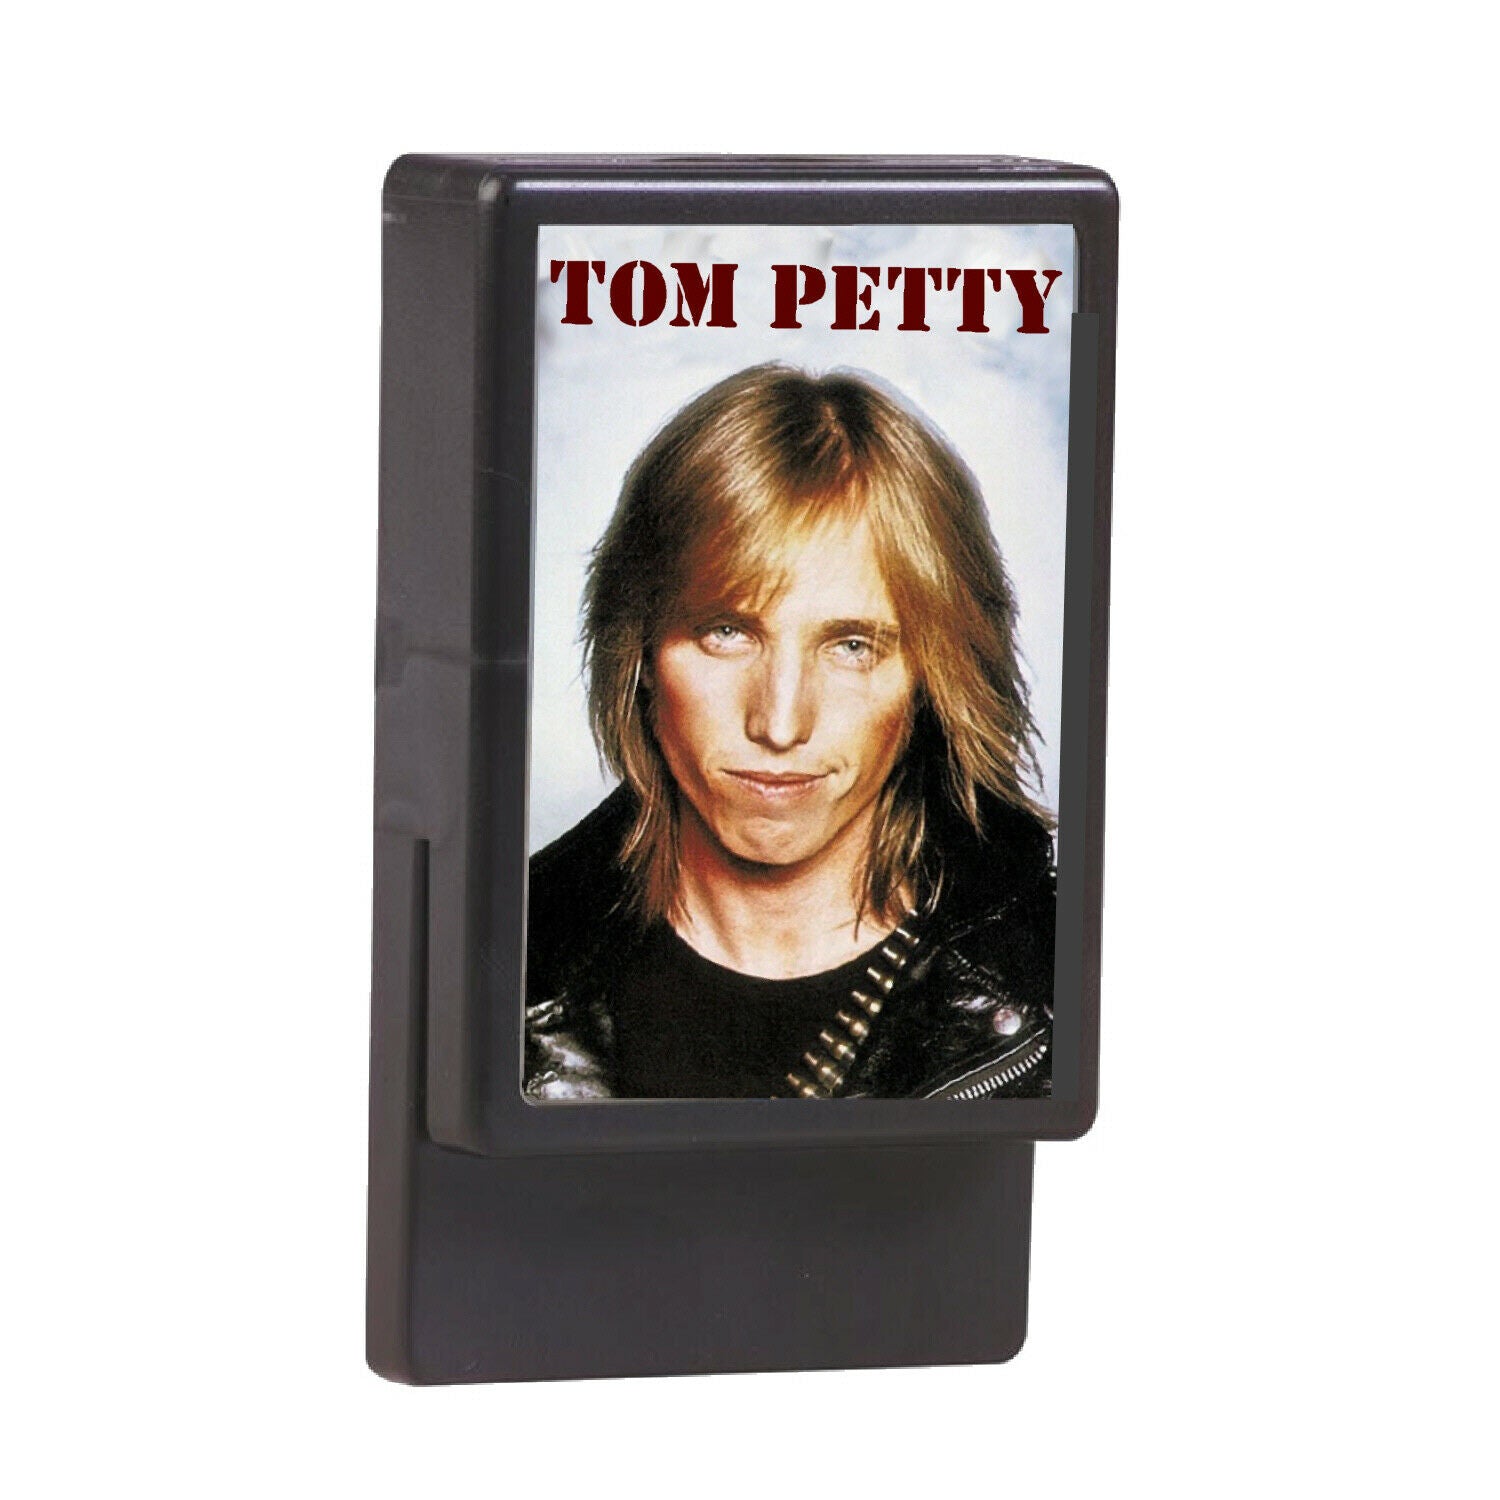 Tom Petty Magnetic Display Clip Big 4 inches